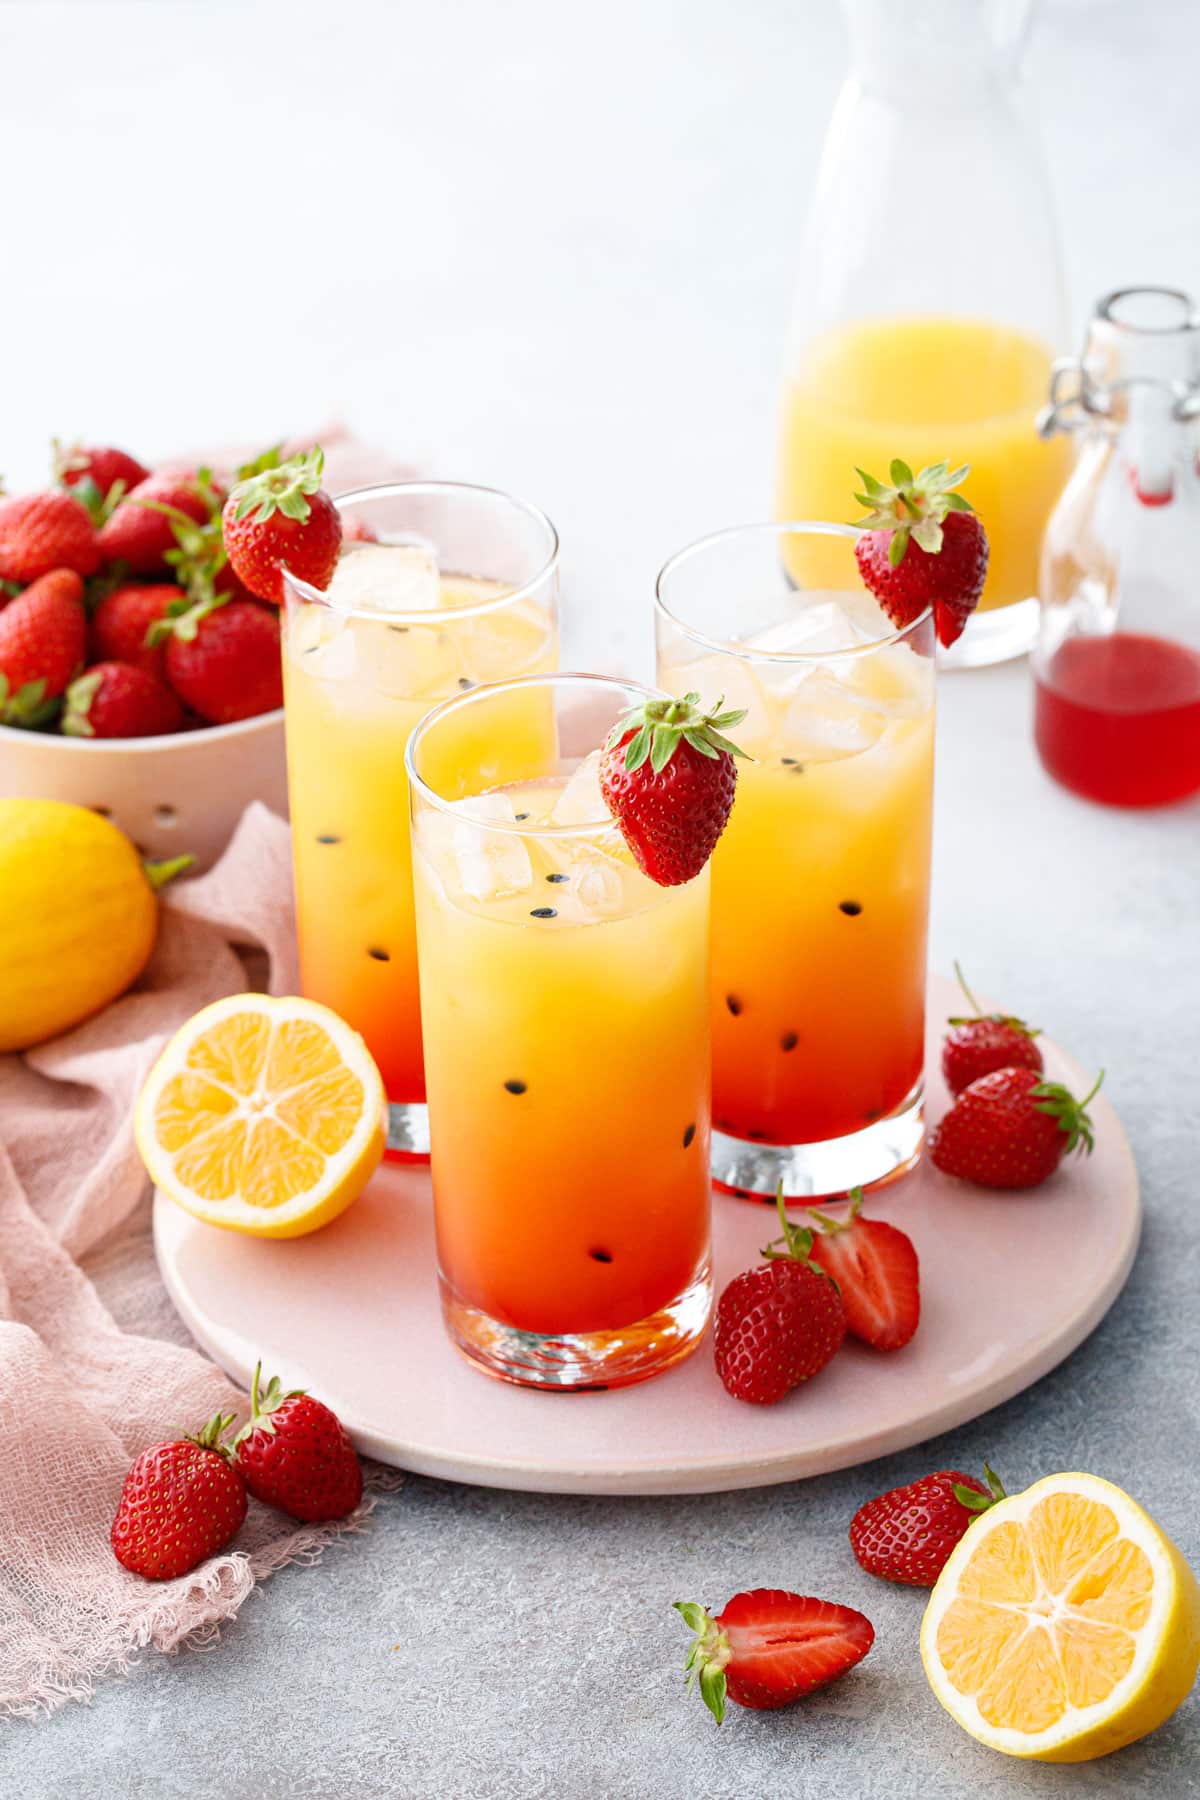 Three glasses with pretty ombre colored Strawberry Passionfruit Lemonade, with black passionfruit seeds speckled throughout and cut lemons and strawberries scattered around.